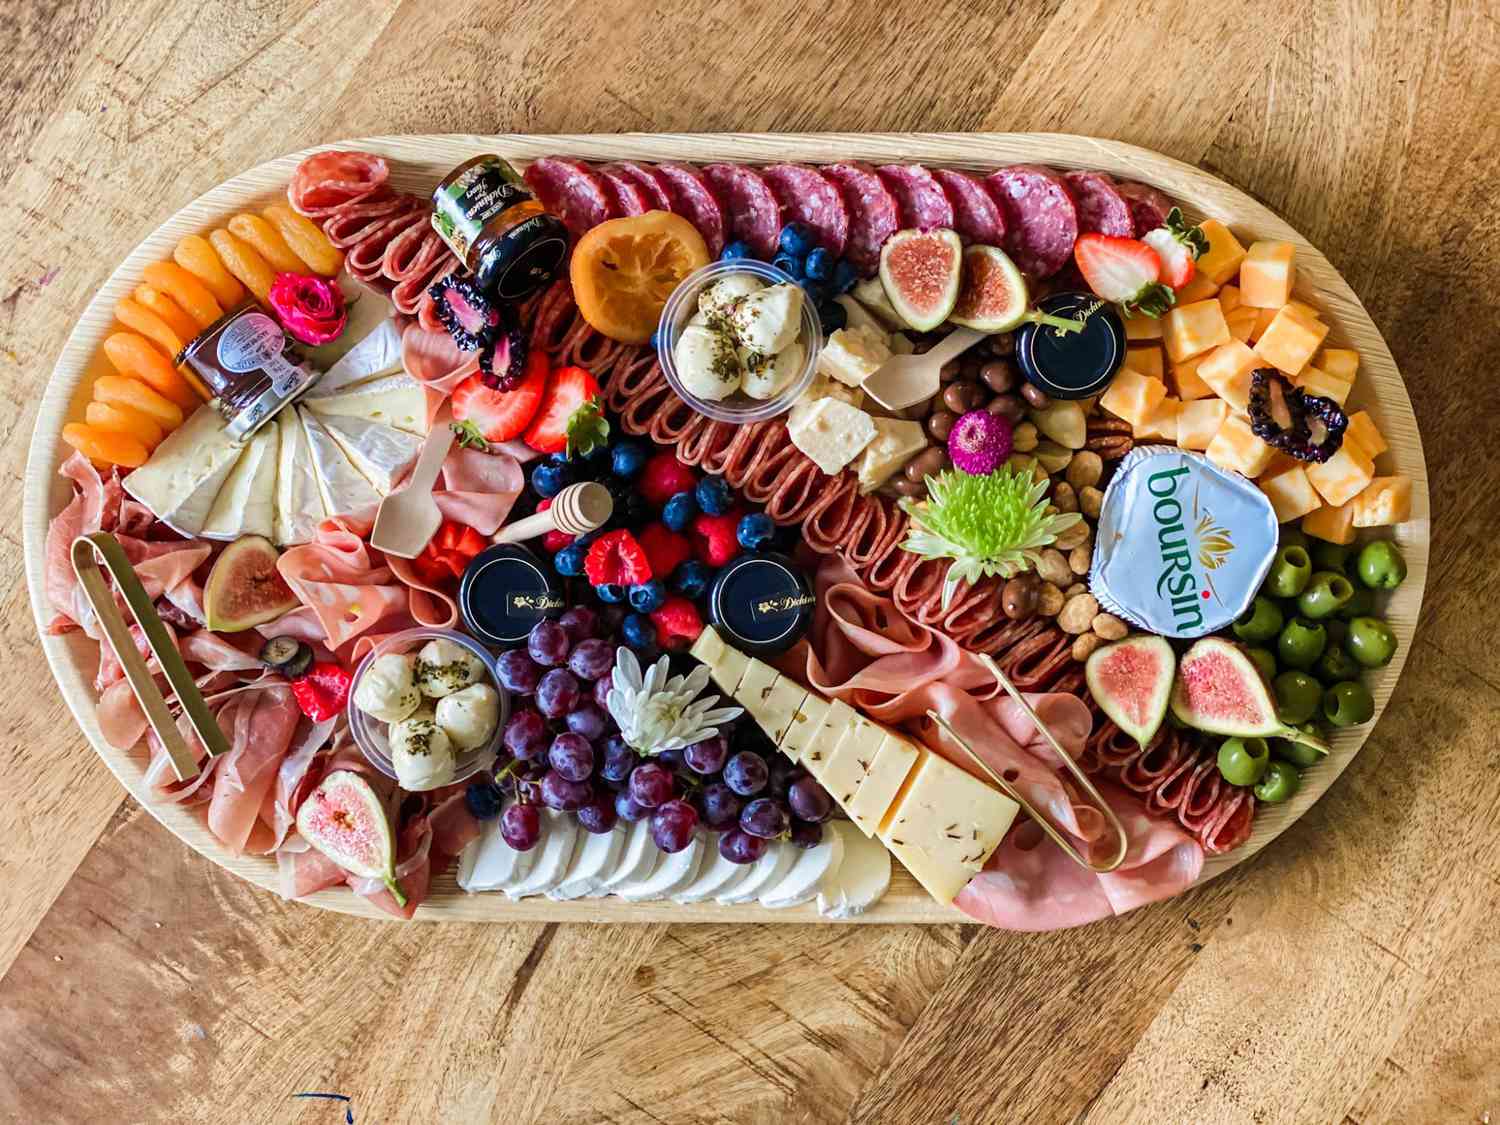 charcuterie board by French Boards and Bites NY with meats, cheese, olives, grapes, and berries.